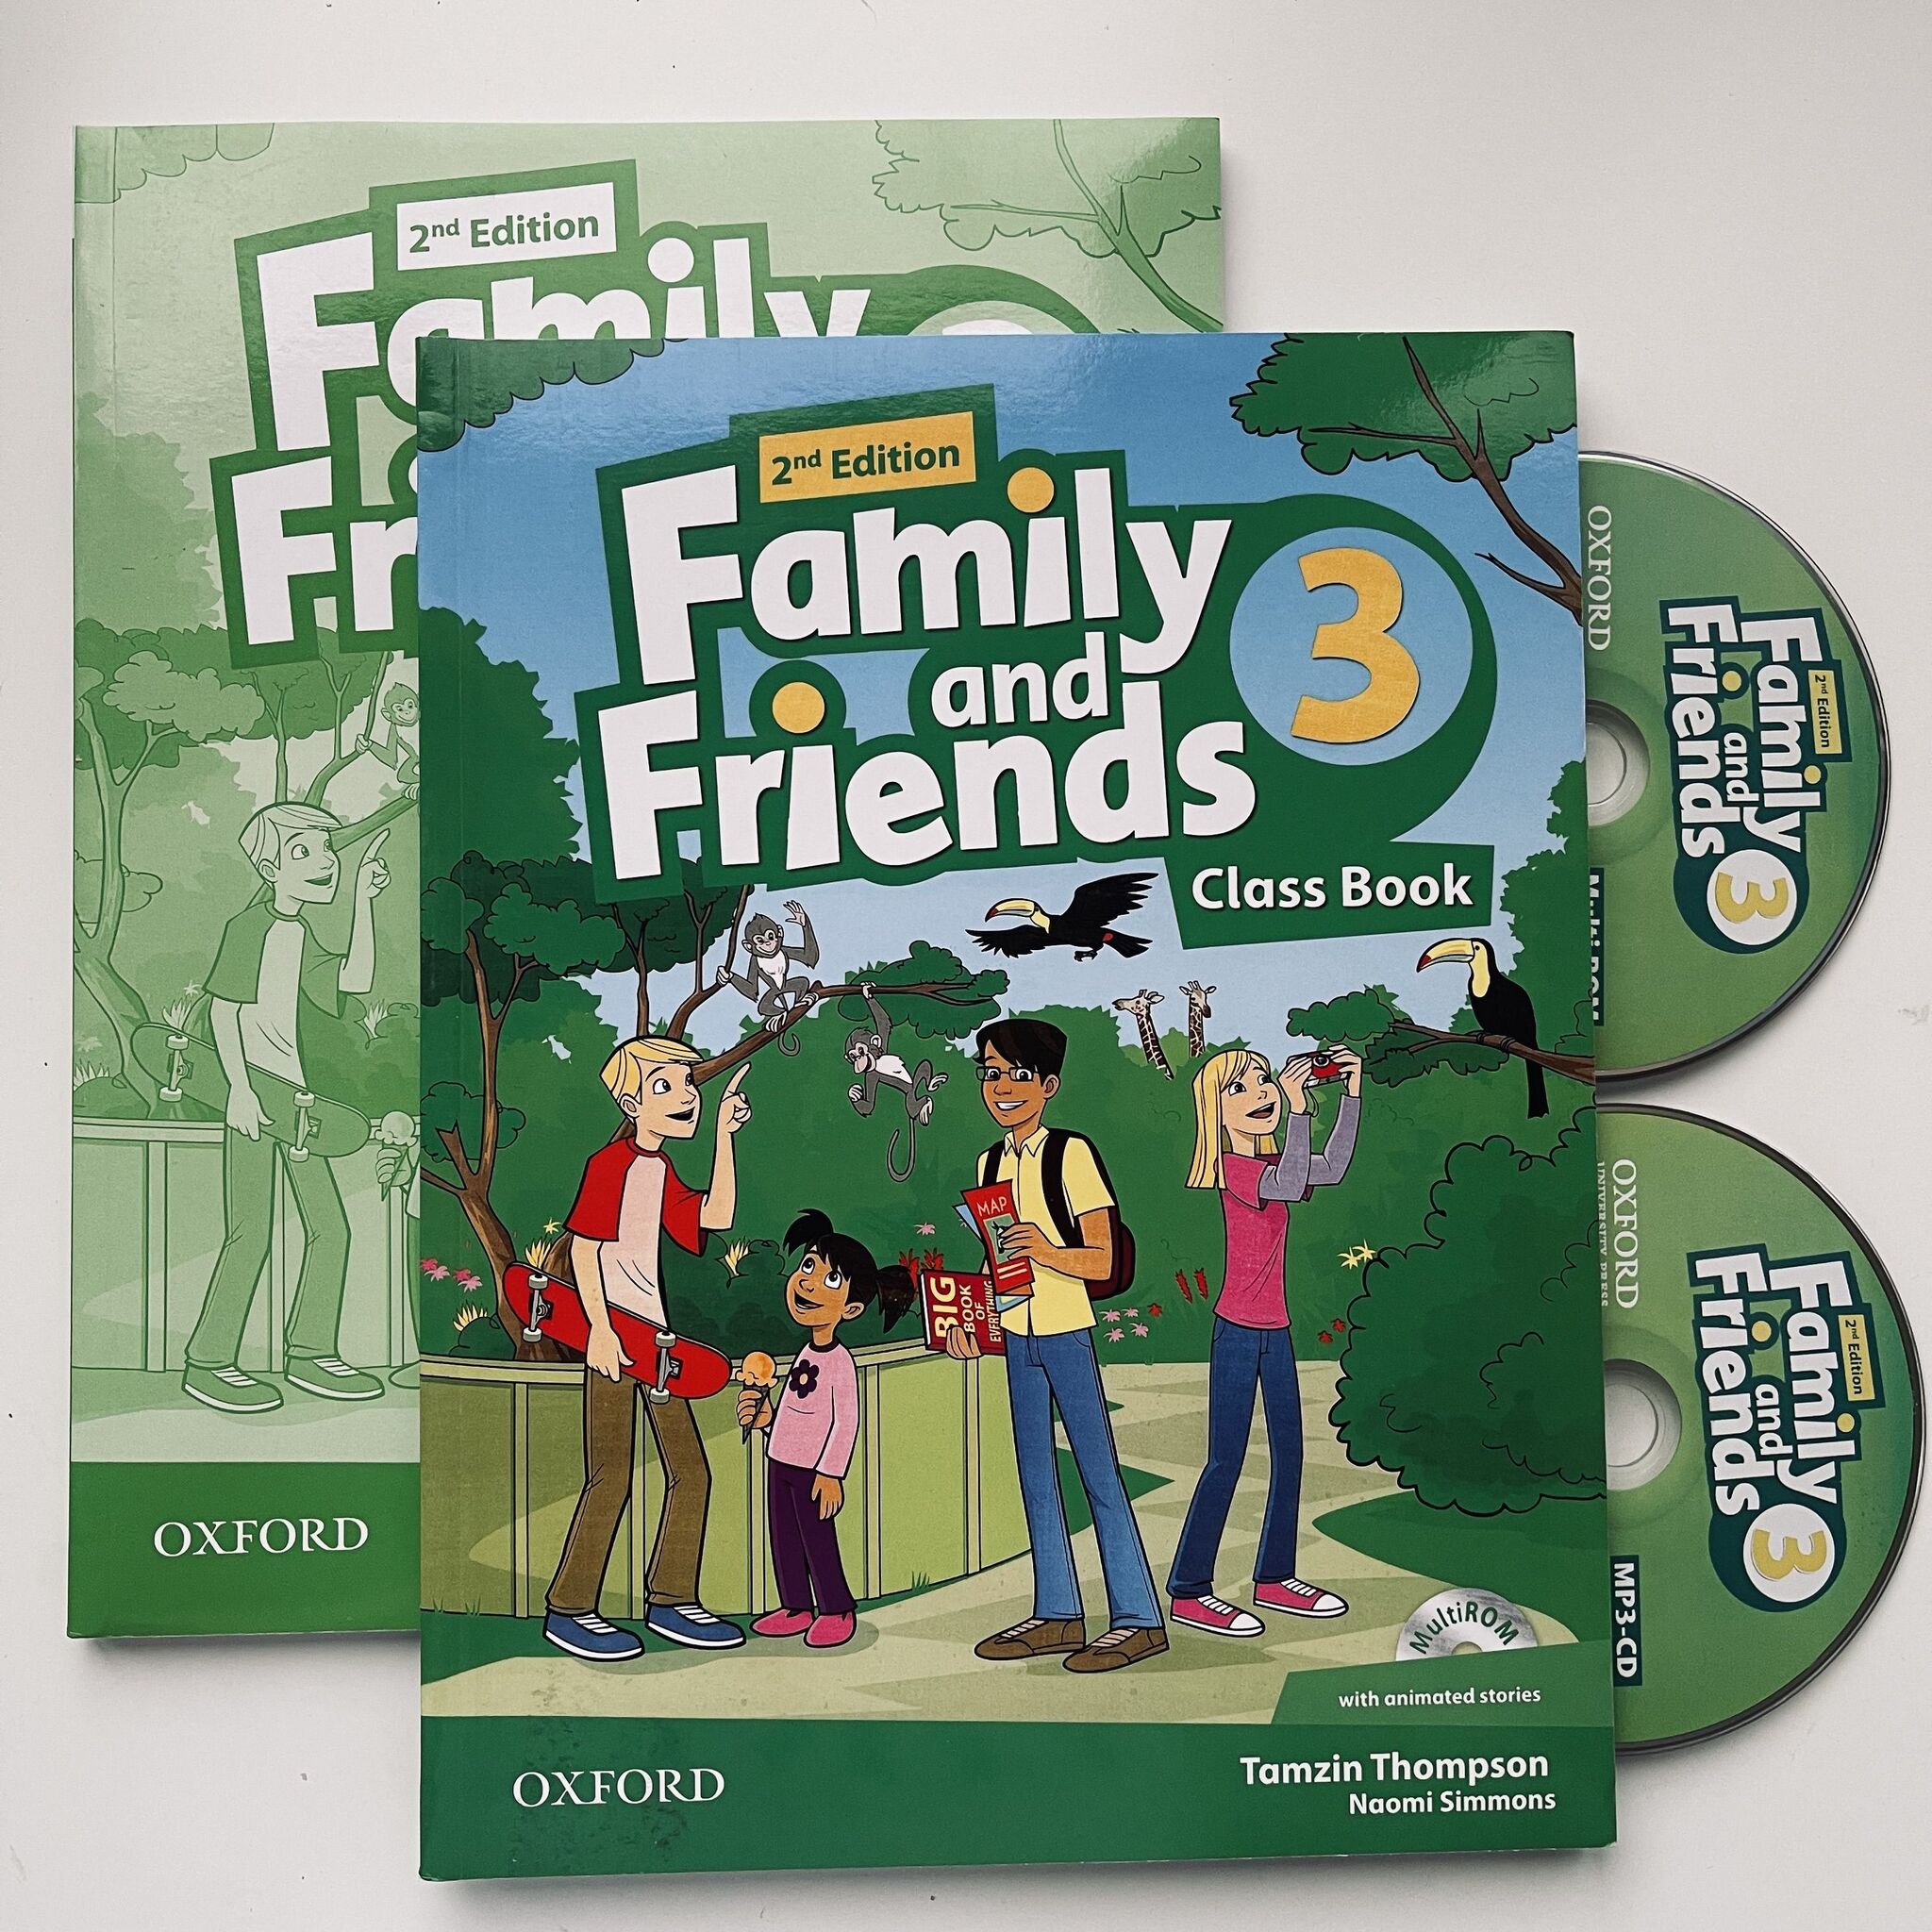 Friends 3 test book. Family and friends 3 Workbook Оксфорд Liz Driscoll. 2nd Edition Family friends Workbook Oxford Naomi Simmons. Family and friends 3 рабочая тетрадь. Family and friends 3 class book.